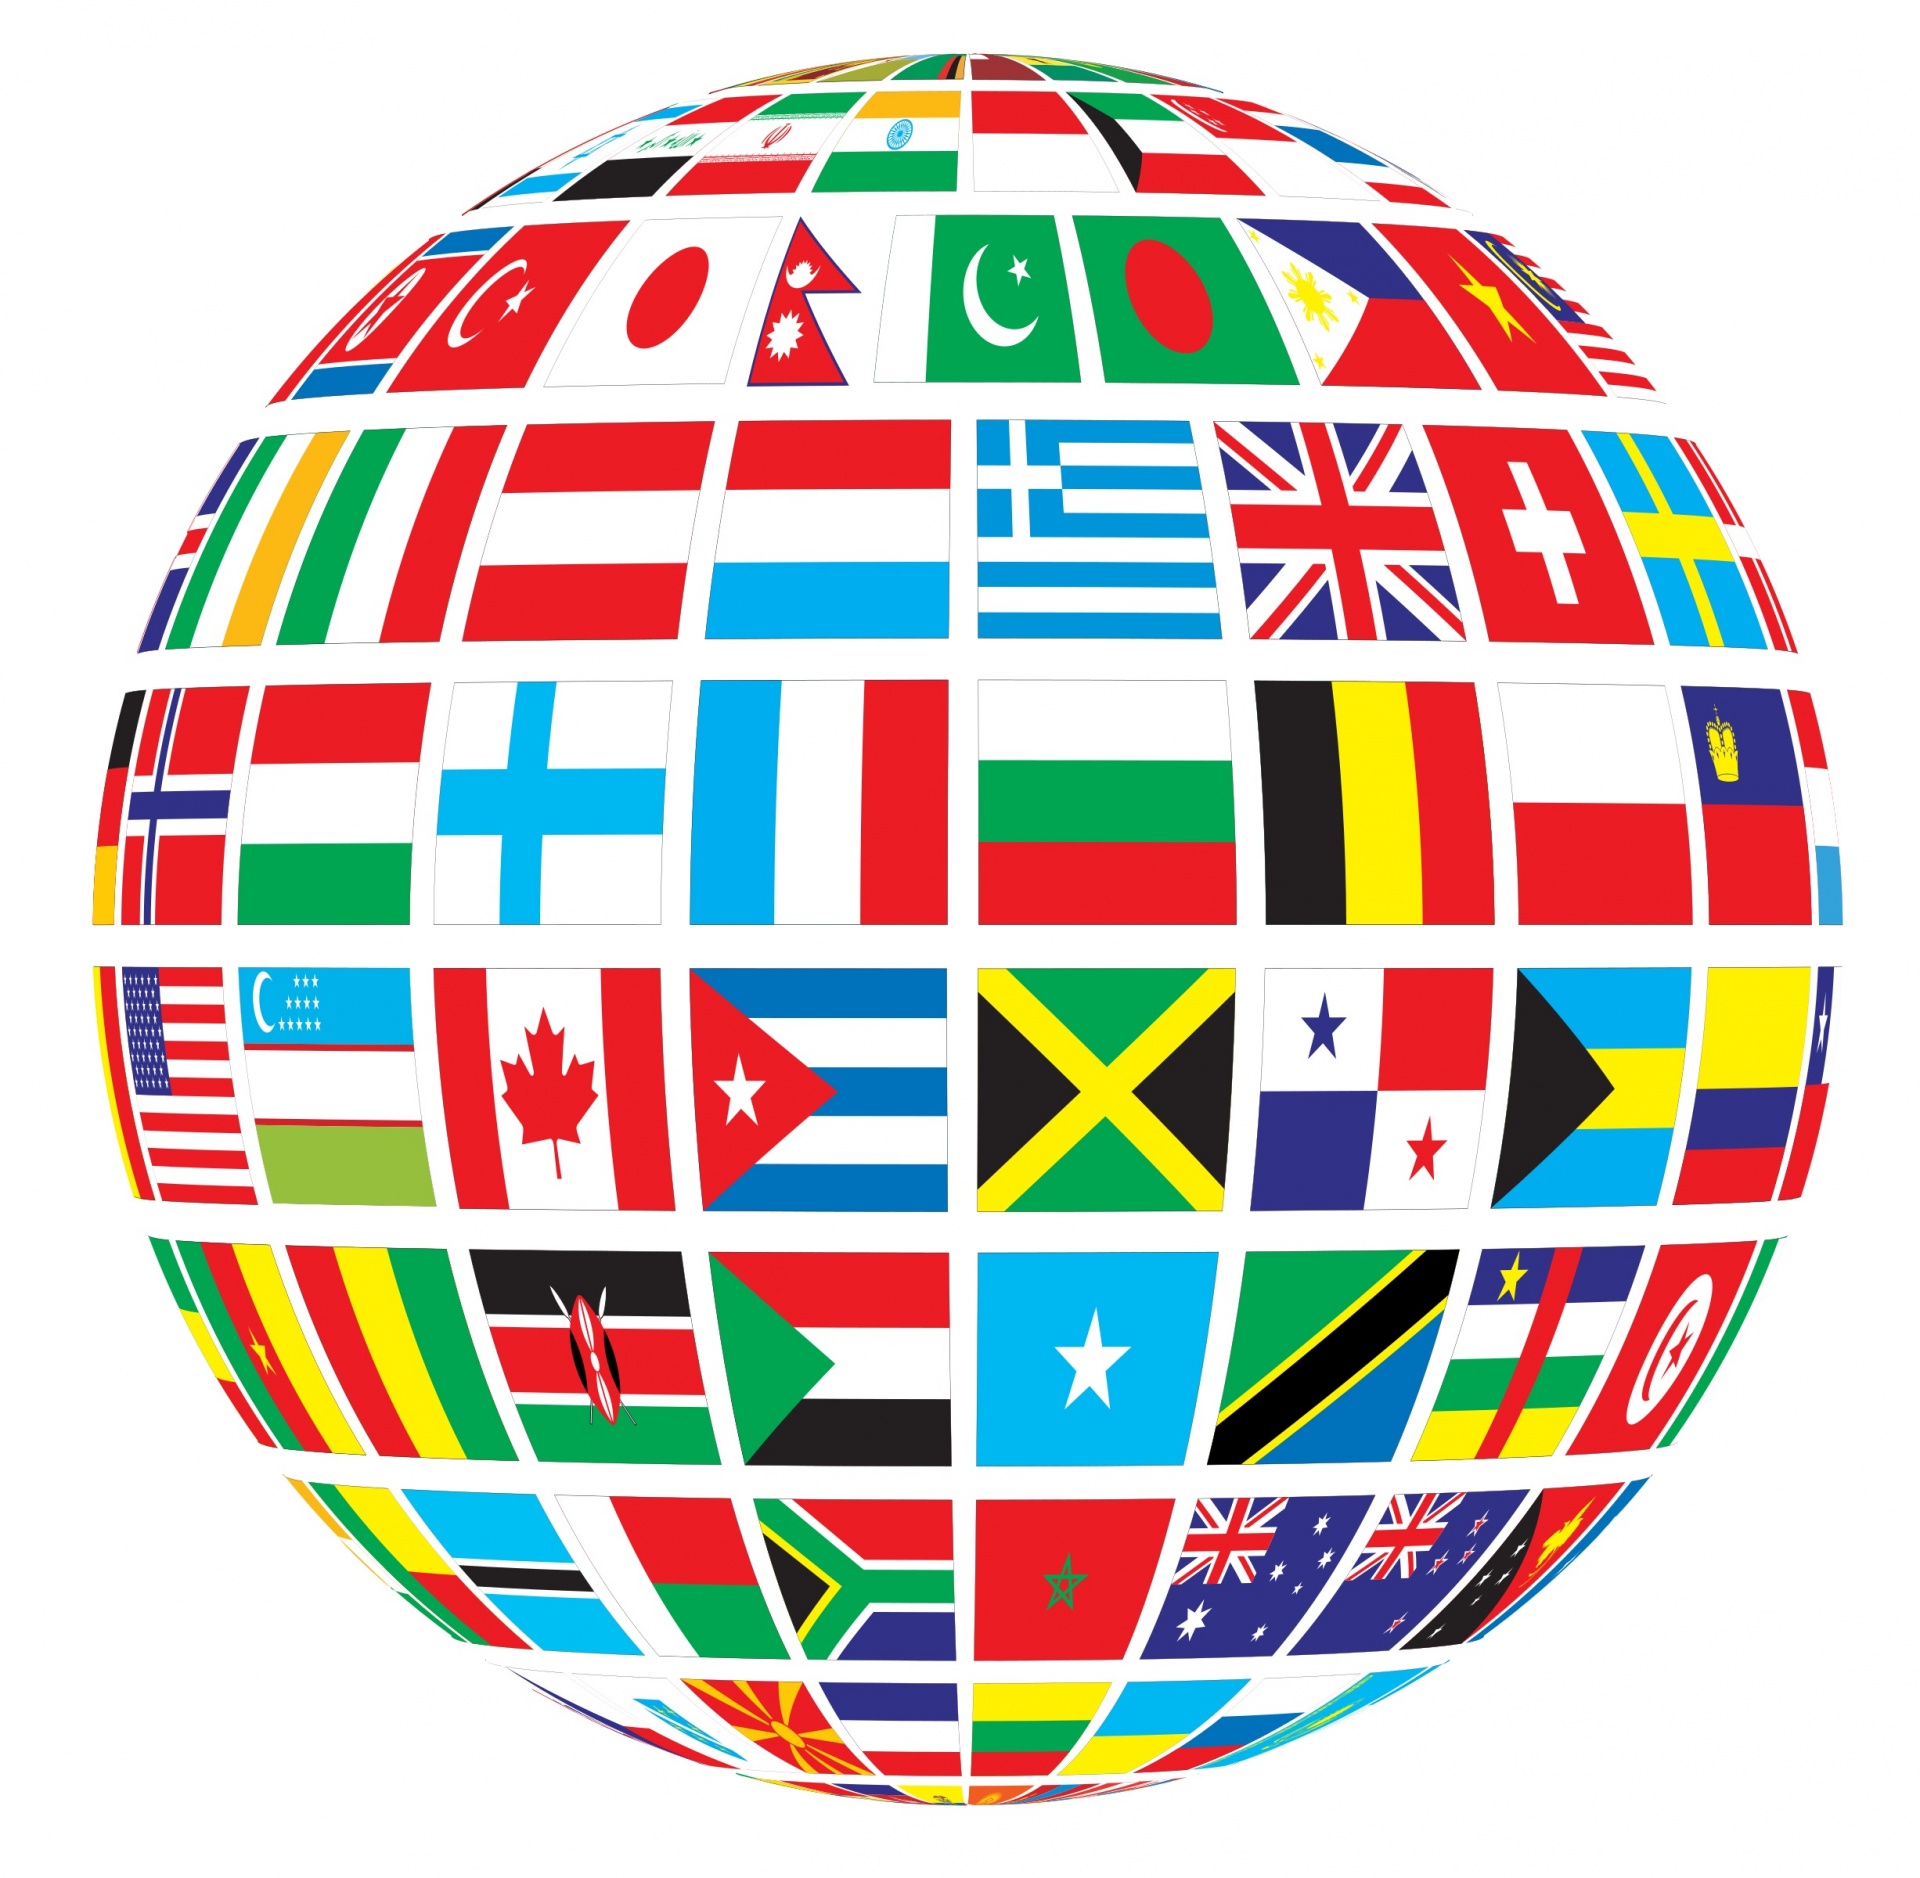 Image of globe made up of the flags of the world. 